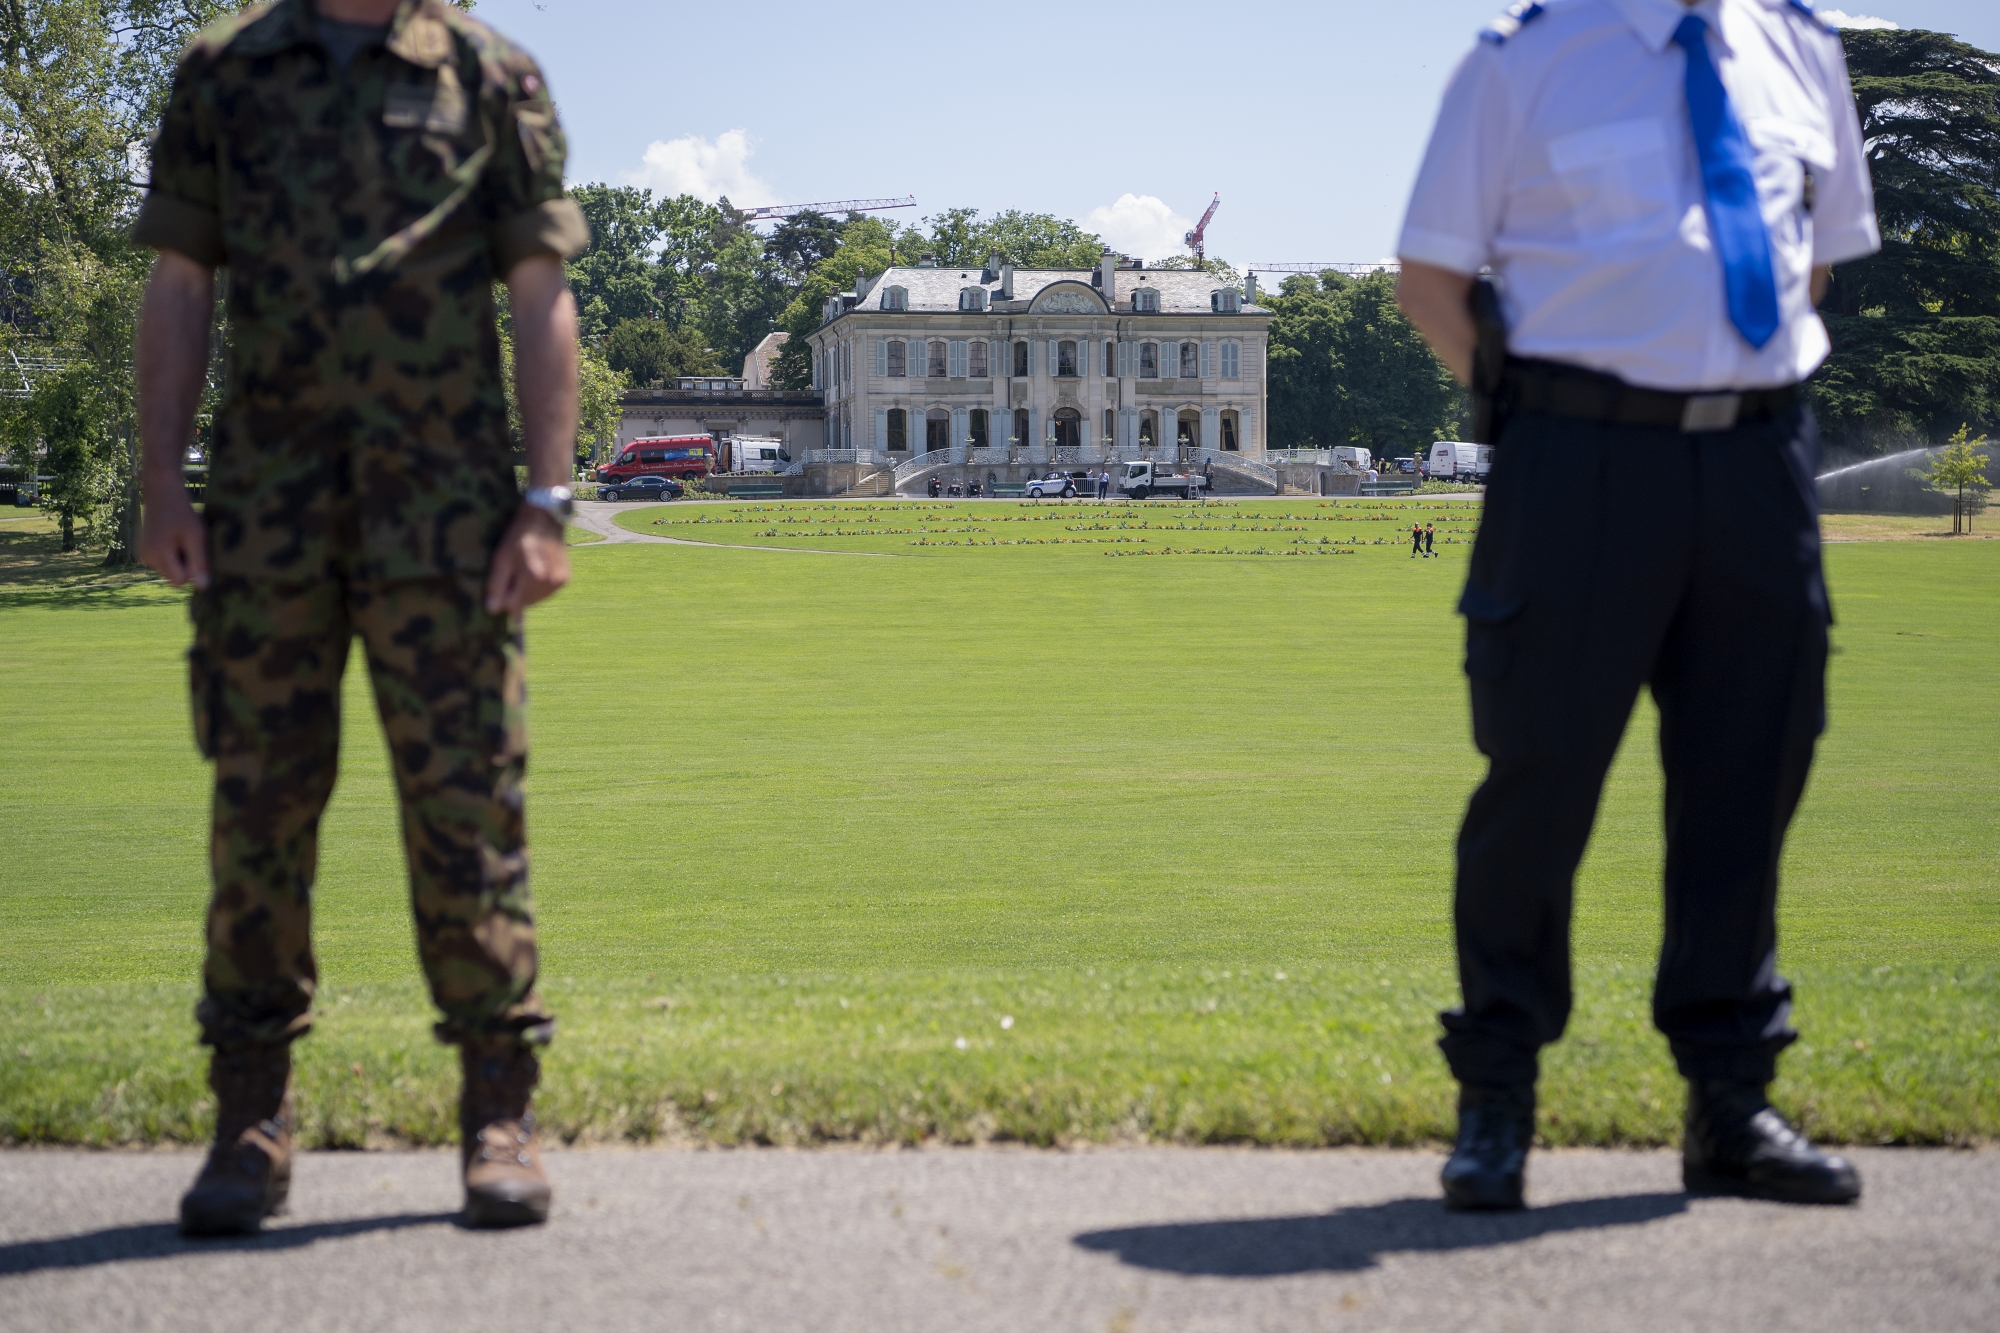 The villa La Grange is photographed between two people in uniforms one of the Swiss army, left and Geneva police on the right, in Geneva, Switzerland, on Friday, June 11, 2021. The "Villa La Grange" is the official venue for the meeting between US President Joe Biden and Russian Presidents Vladimir Poutine in Geneva, scheduled for June 16. (KEYSTONE/Martial Trezzini)